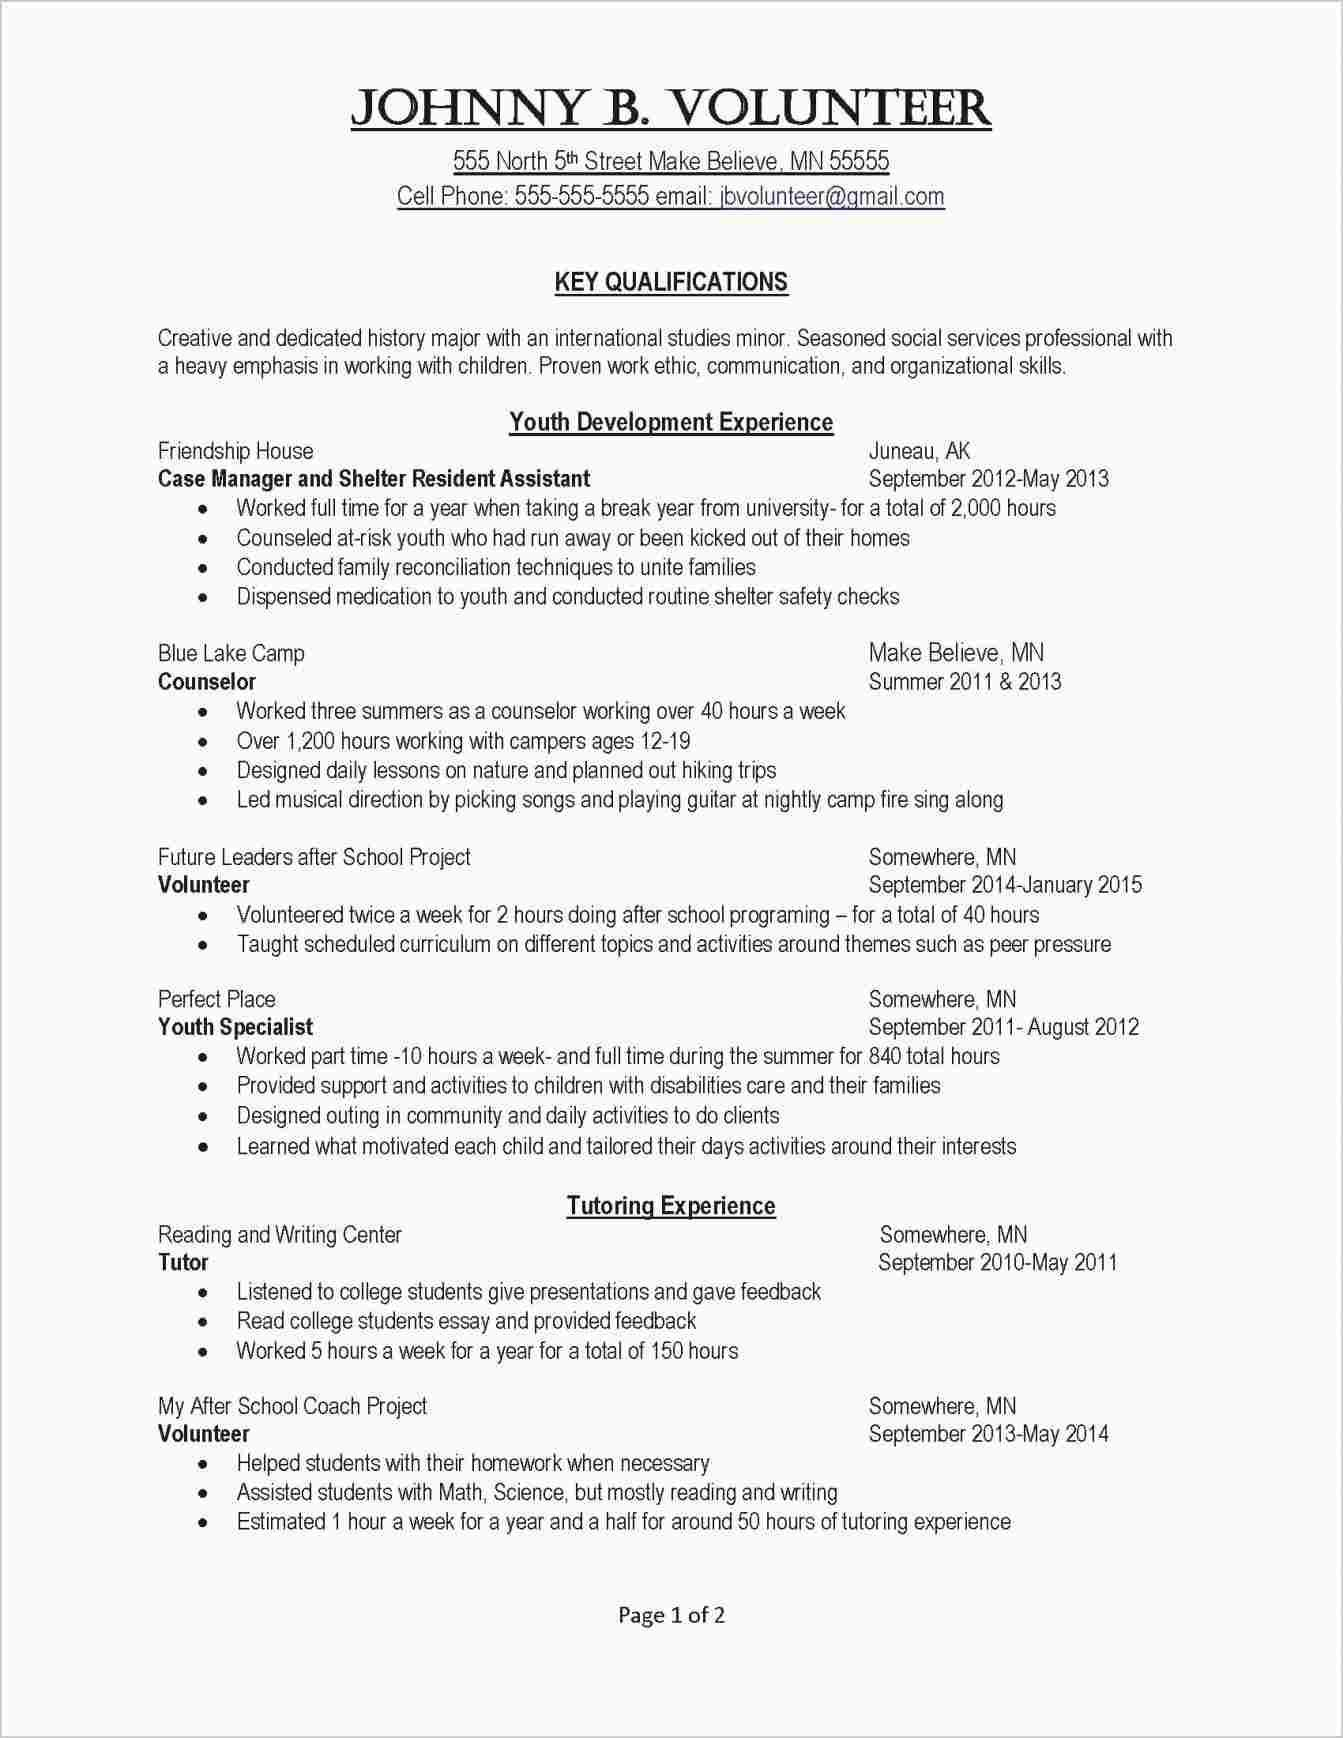 cv-template-for-16-year-old-with-no-work-experience-invitation